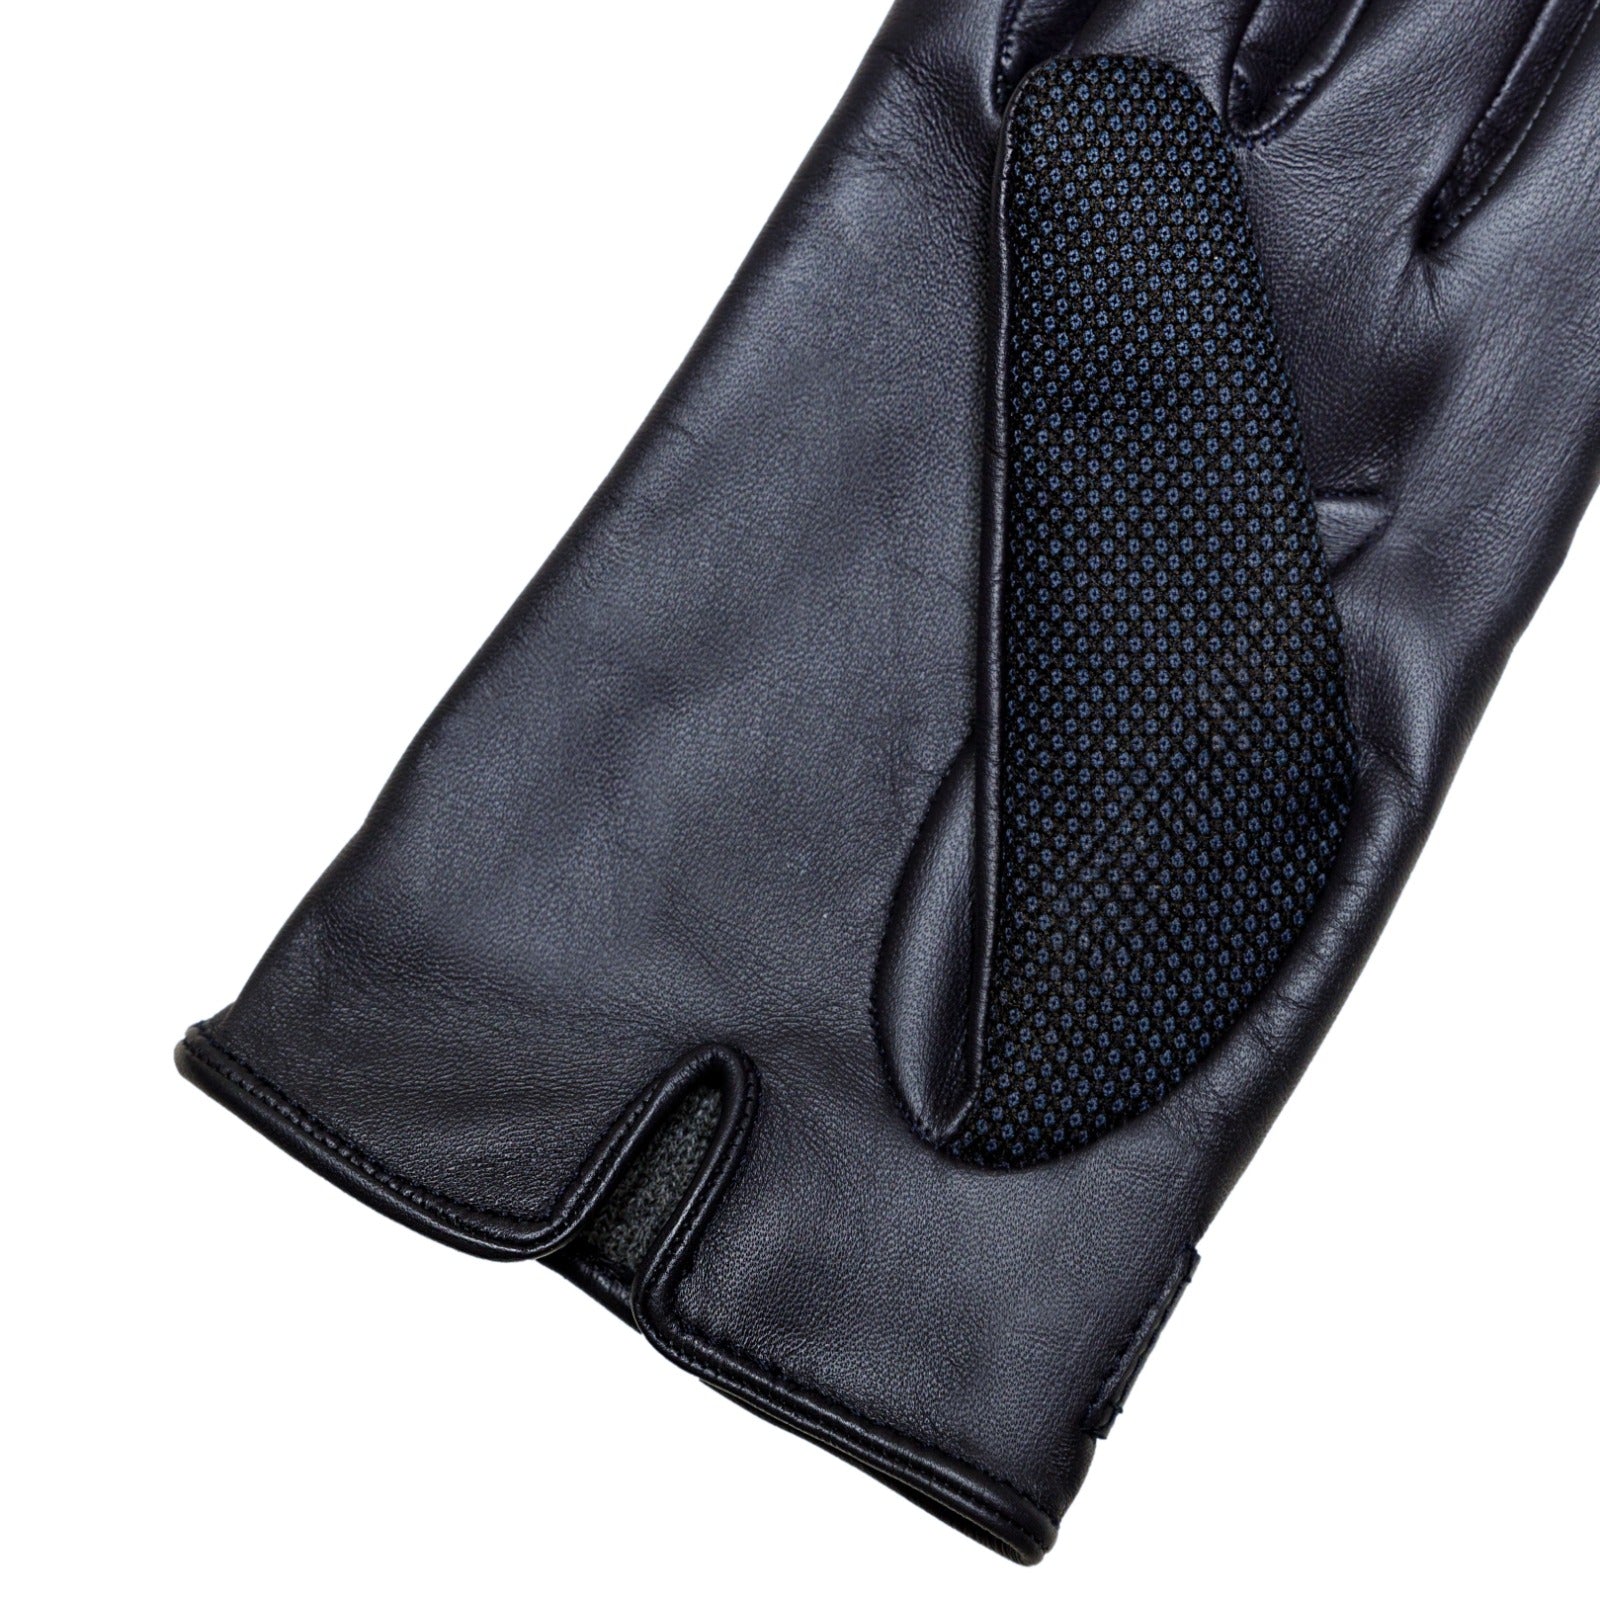 Men's nappa leather and Holland&amp;Sherry wool gloves with strap and cashmere lined